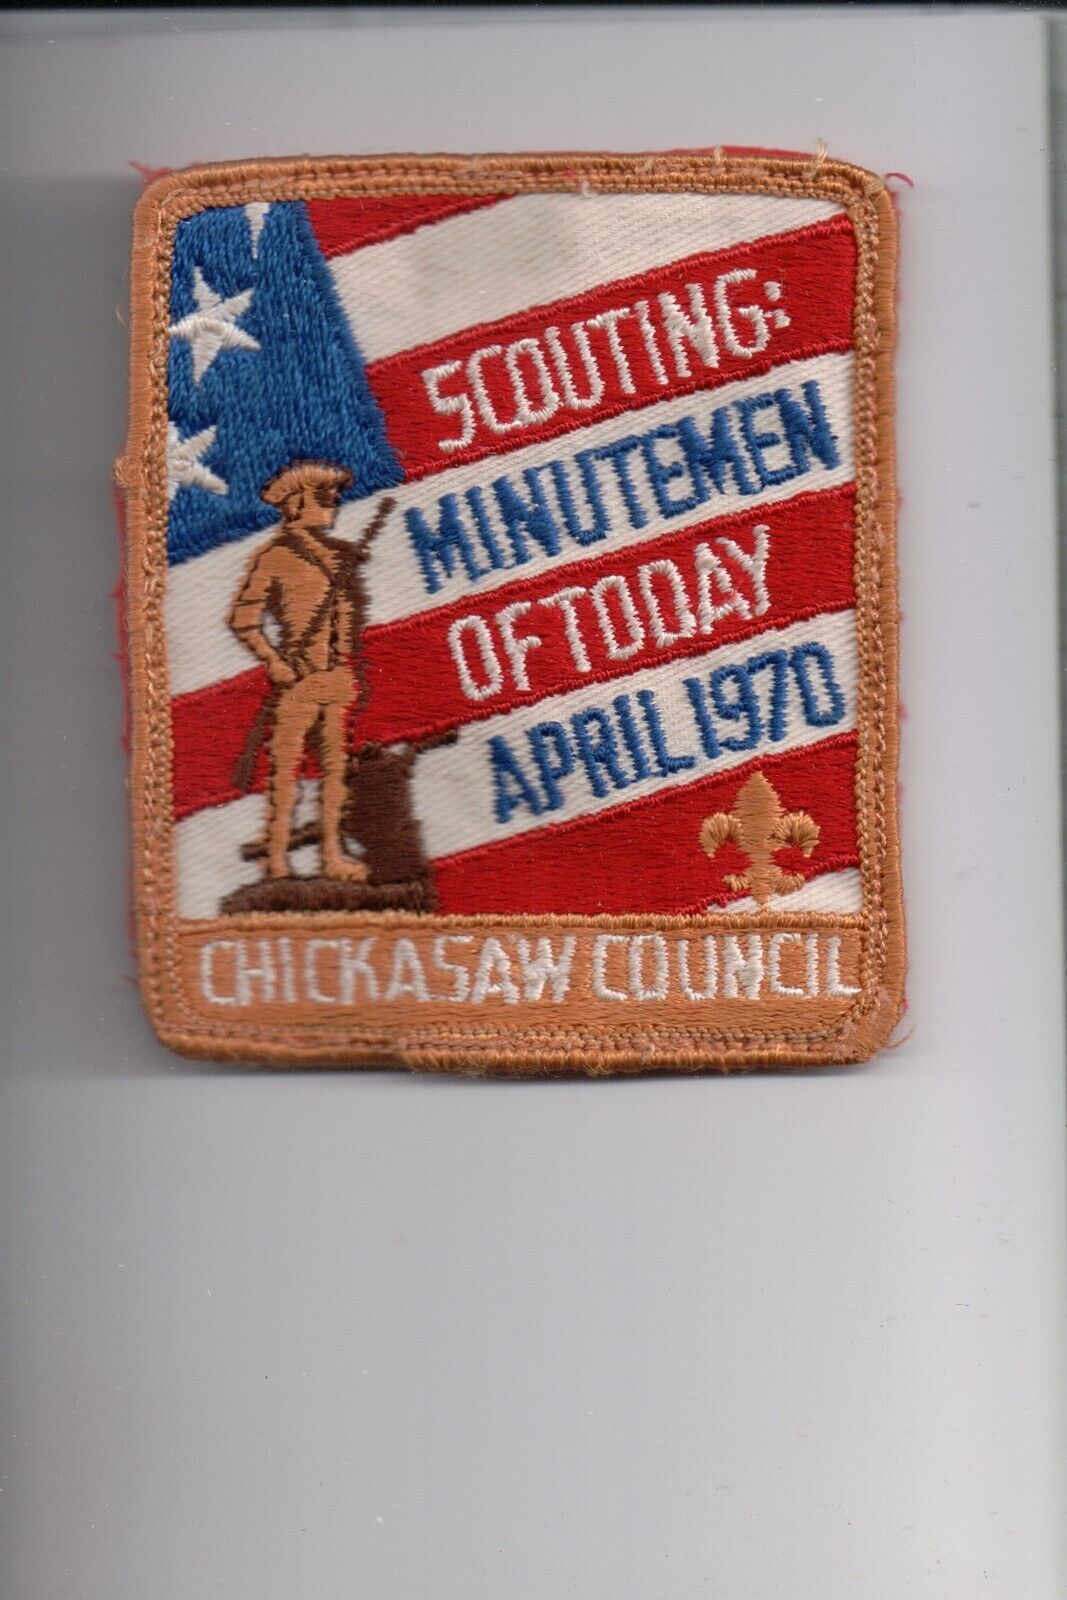 1970 Chickasaw Council Scouting: Minutemen Of Today patch